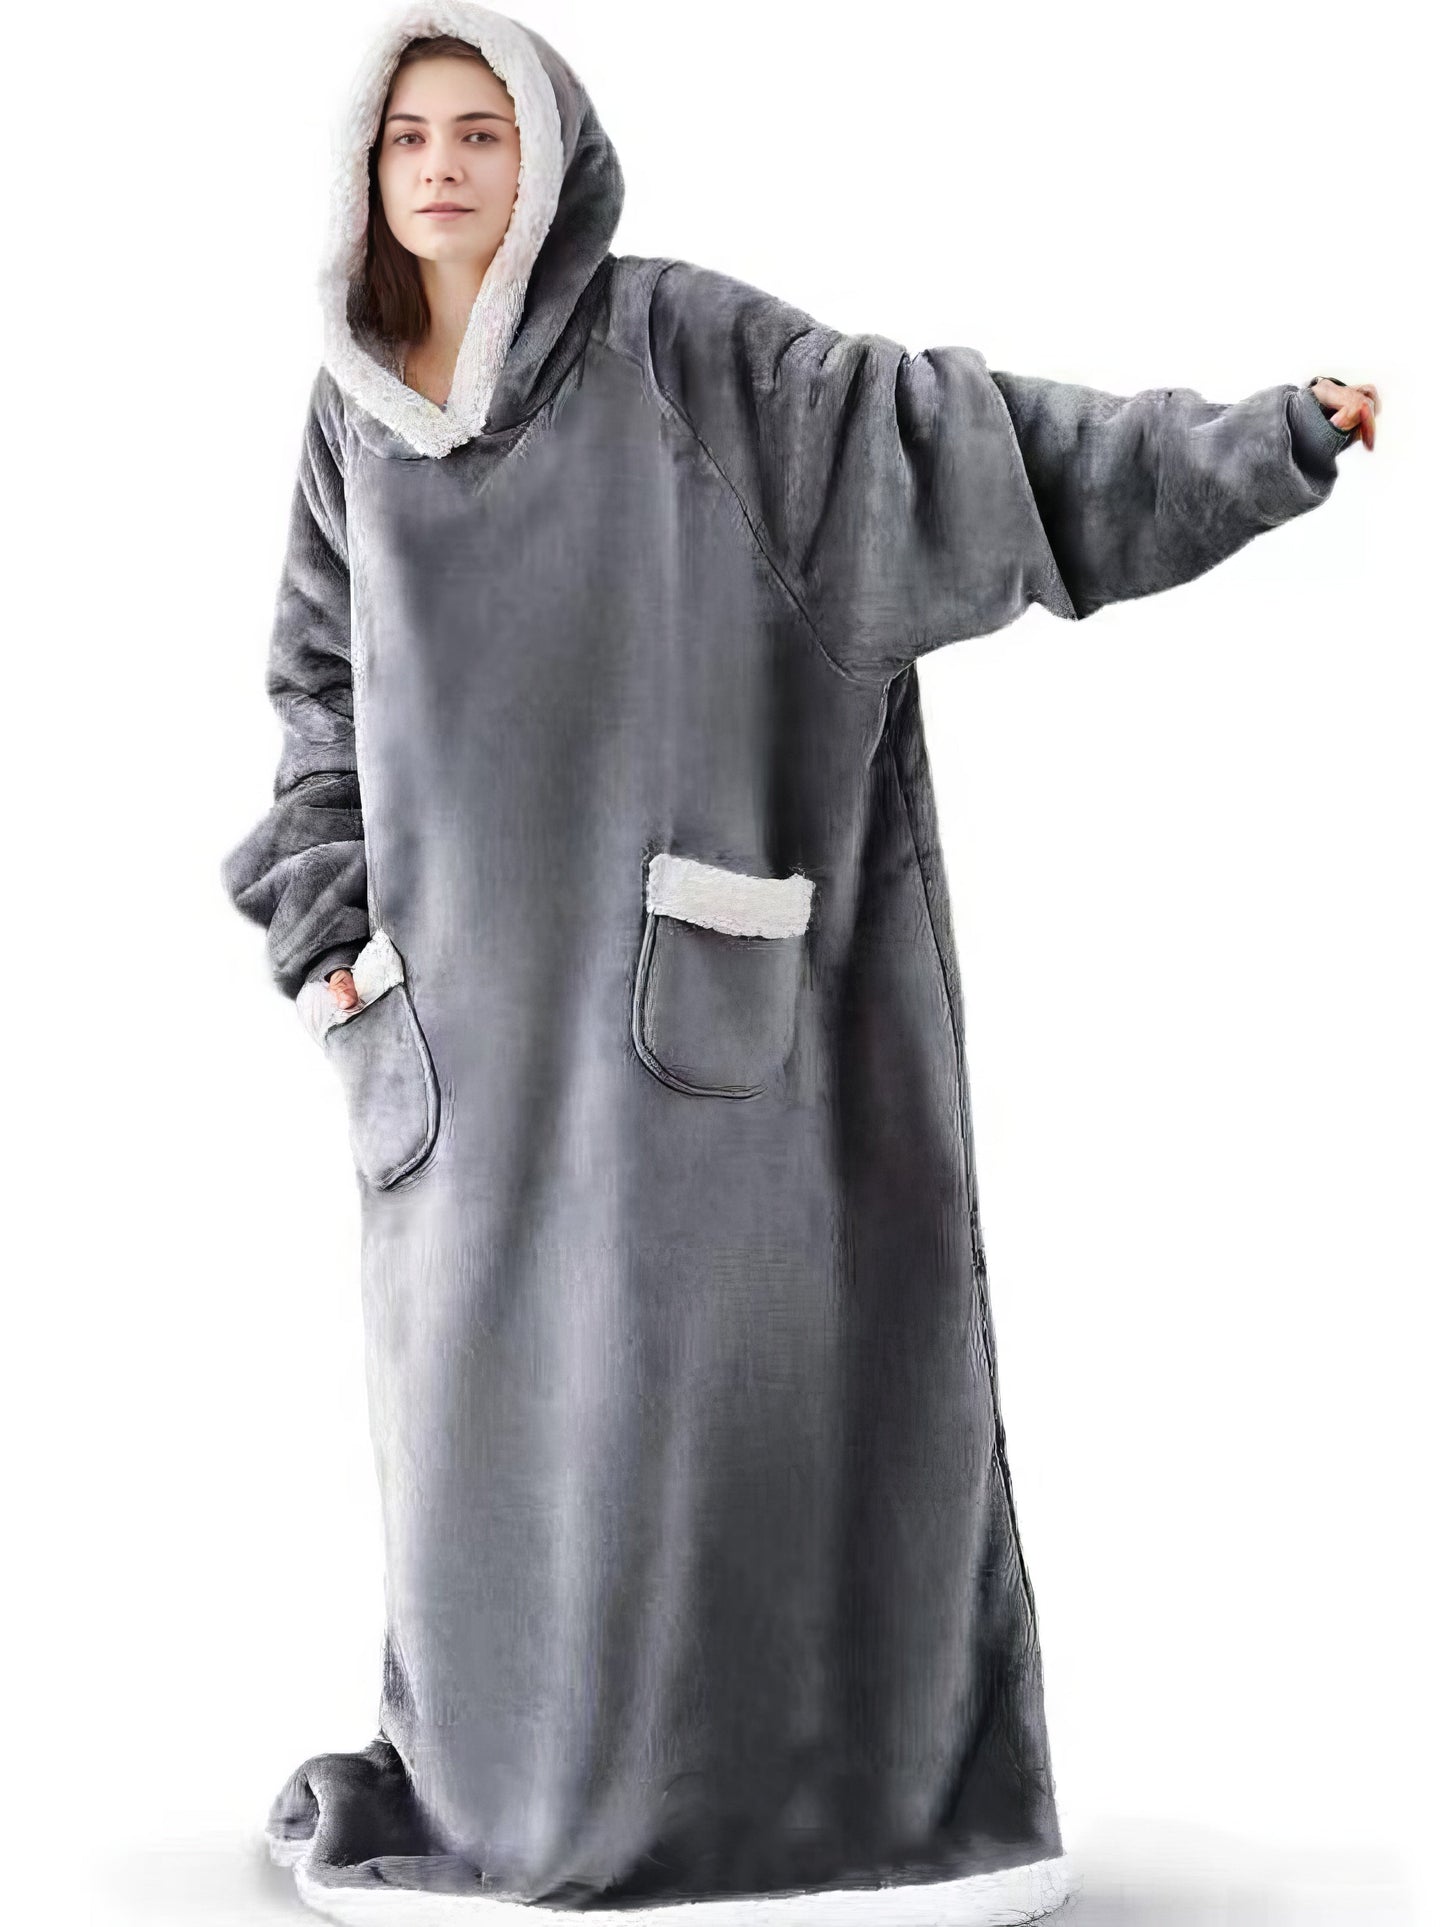 Pajamas - Oversized Wearable Blanket Flannel Thick Soft Warm Long Pajama - MsDressly